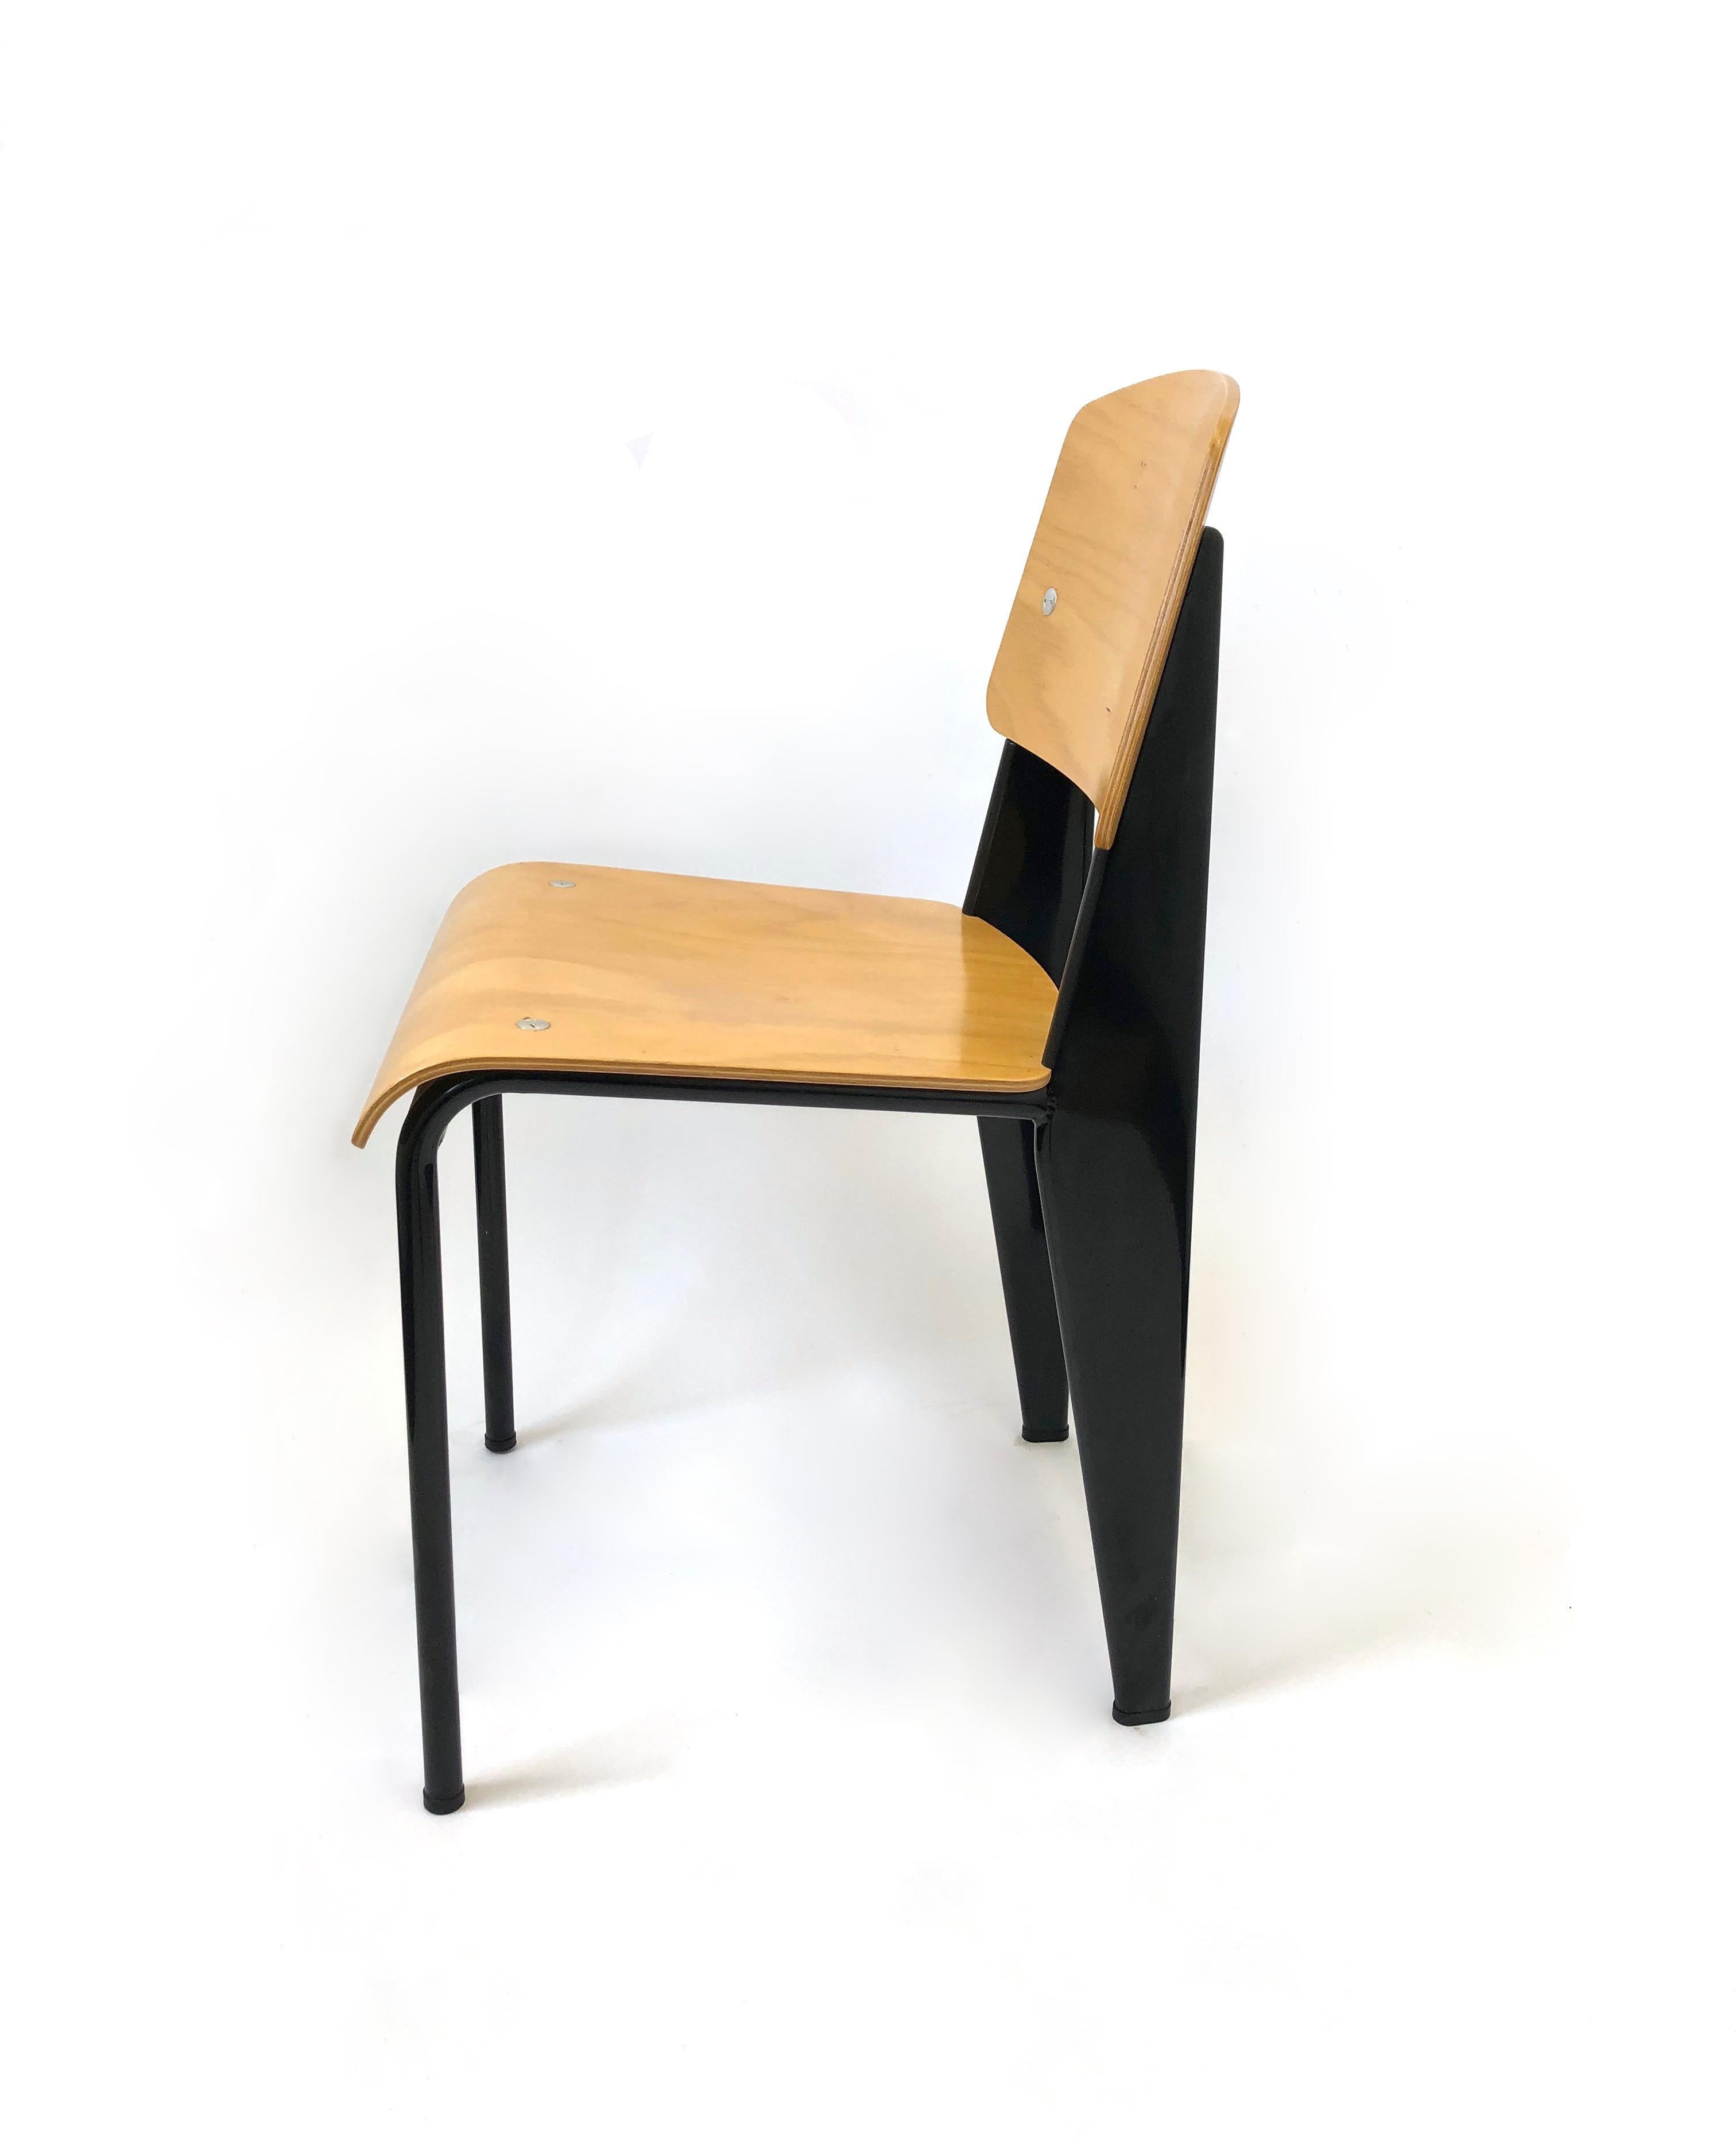 Wood Standard Chair by Jean Prouvé, Vitra Edition 2002